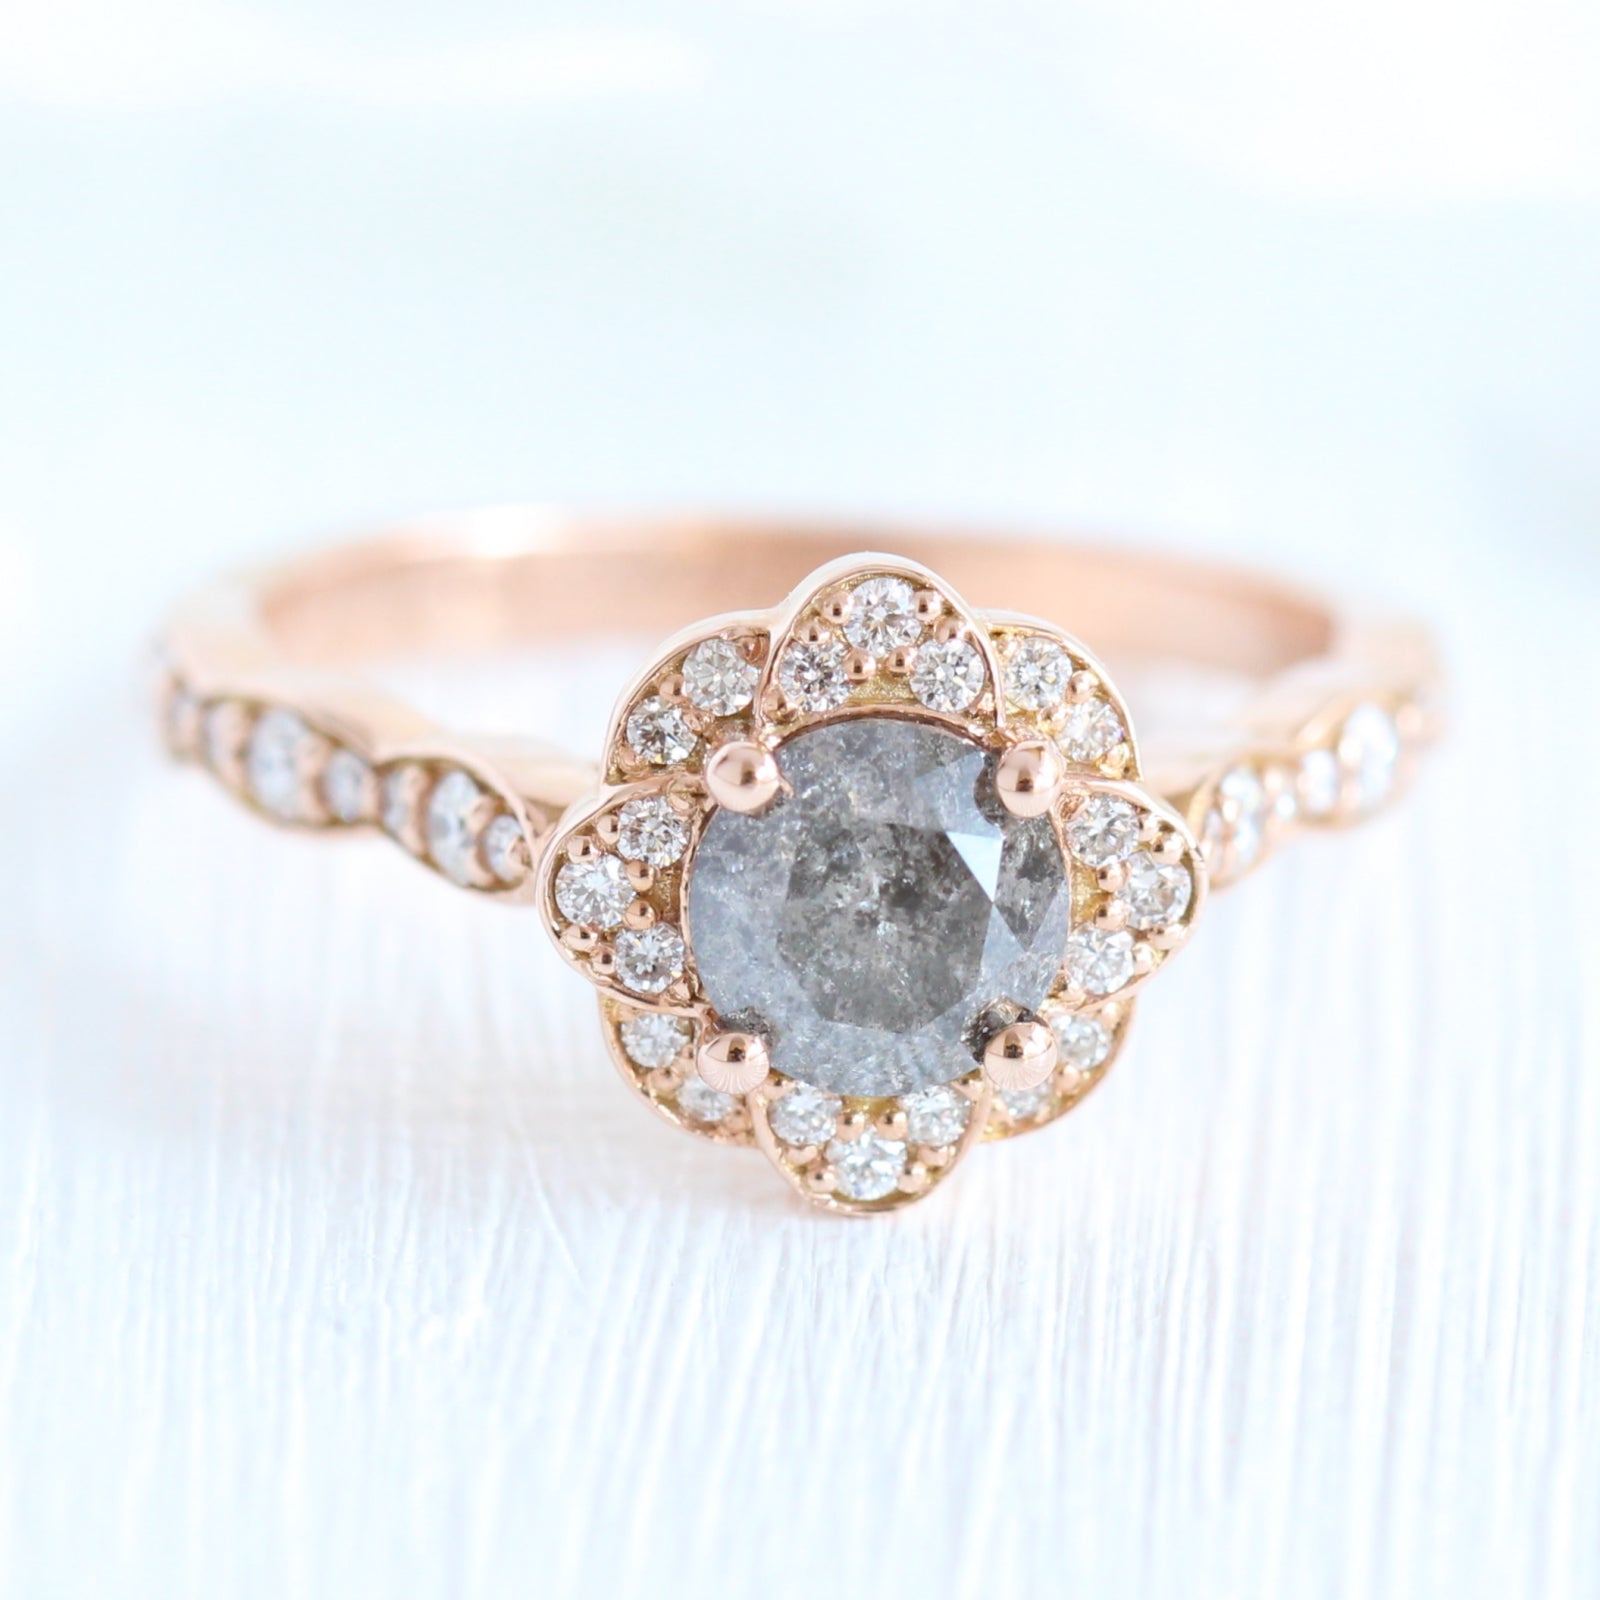 Gray diamond engagement ring in rose gold vintage floral diamond band by la more design